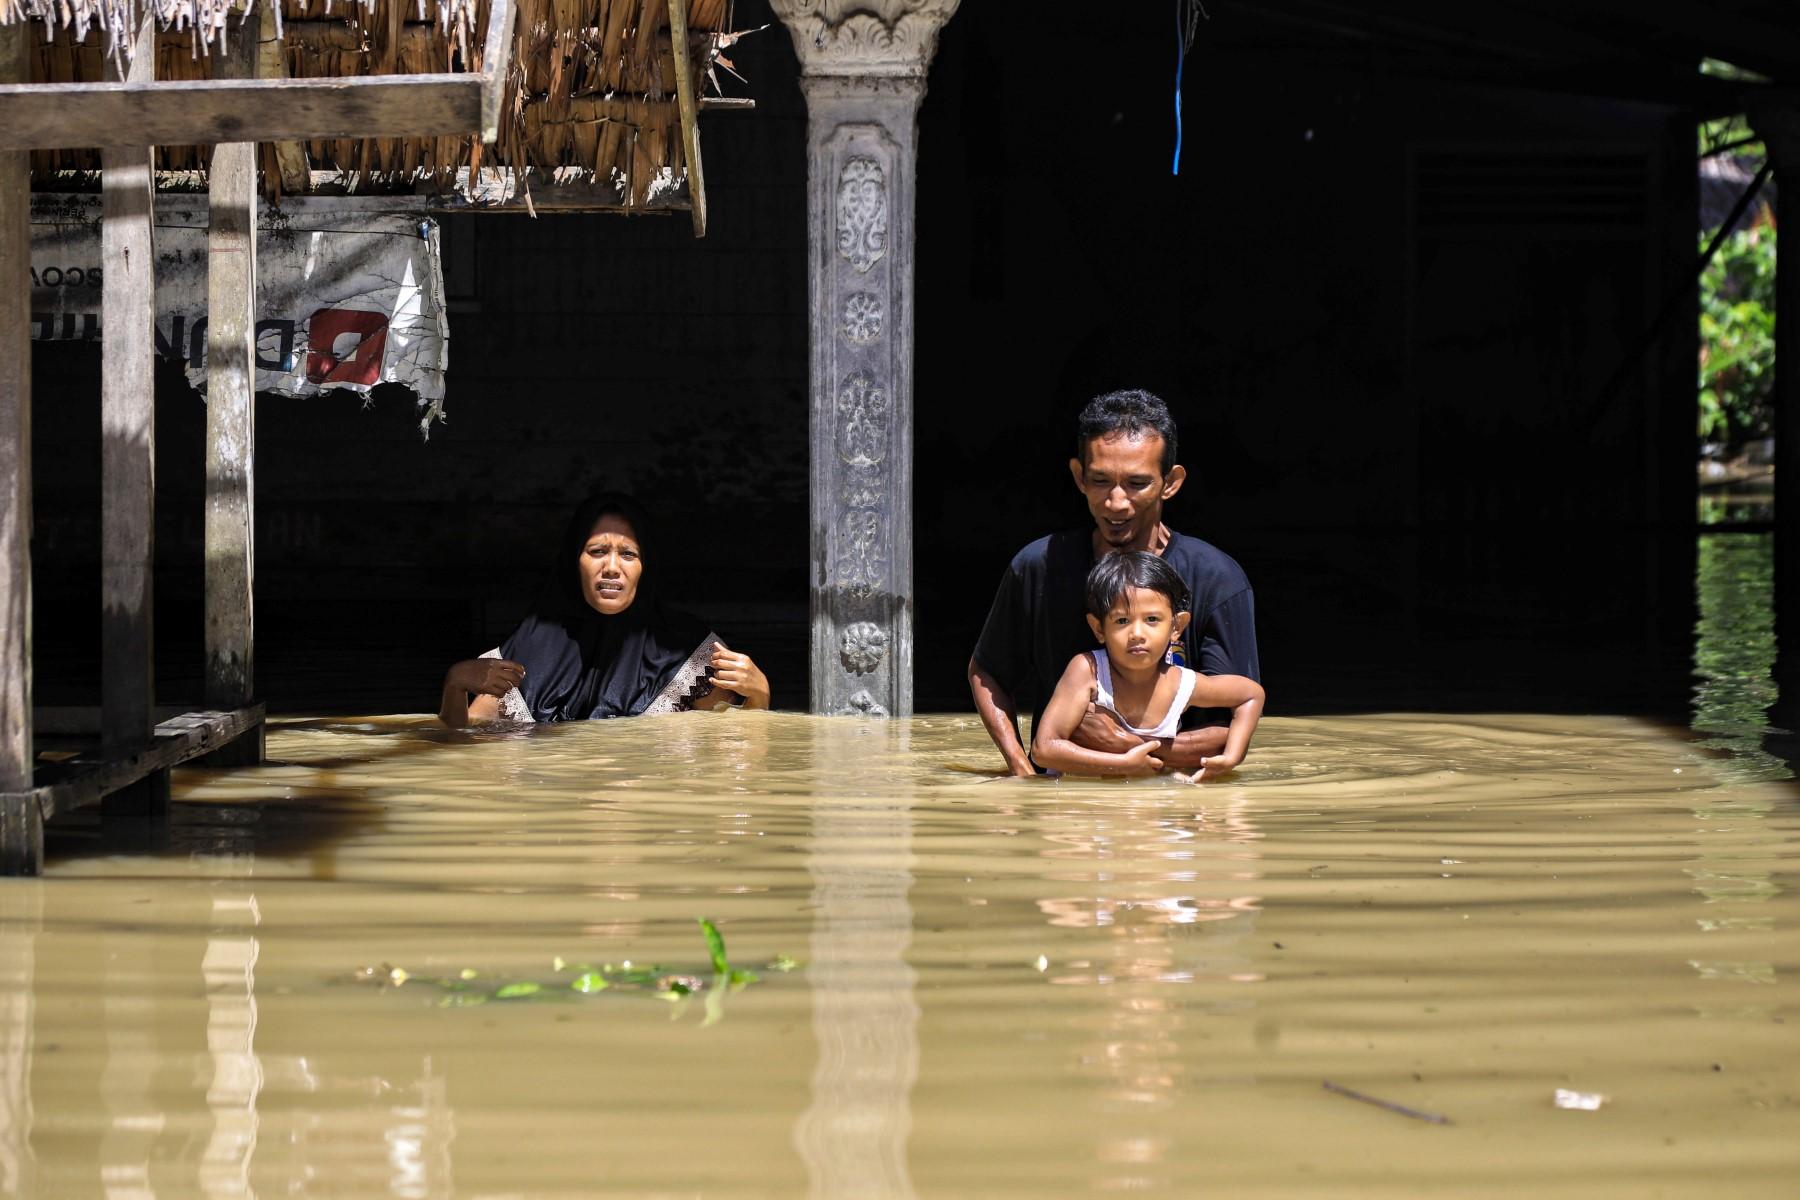 A family wades through floodwaters outside a residence in the Gampong Meunasah area in North Aceh on Jan 4. Photo: AFP